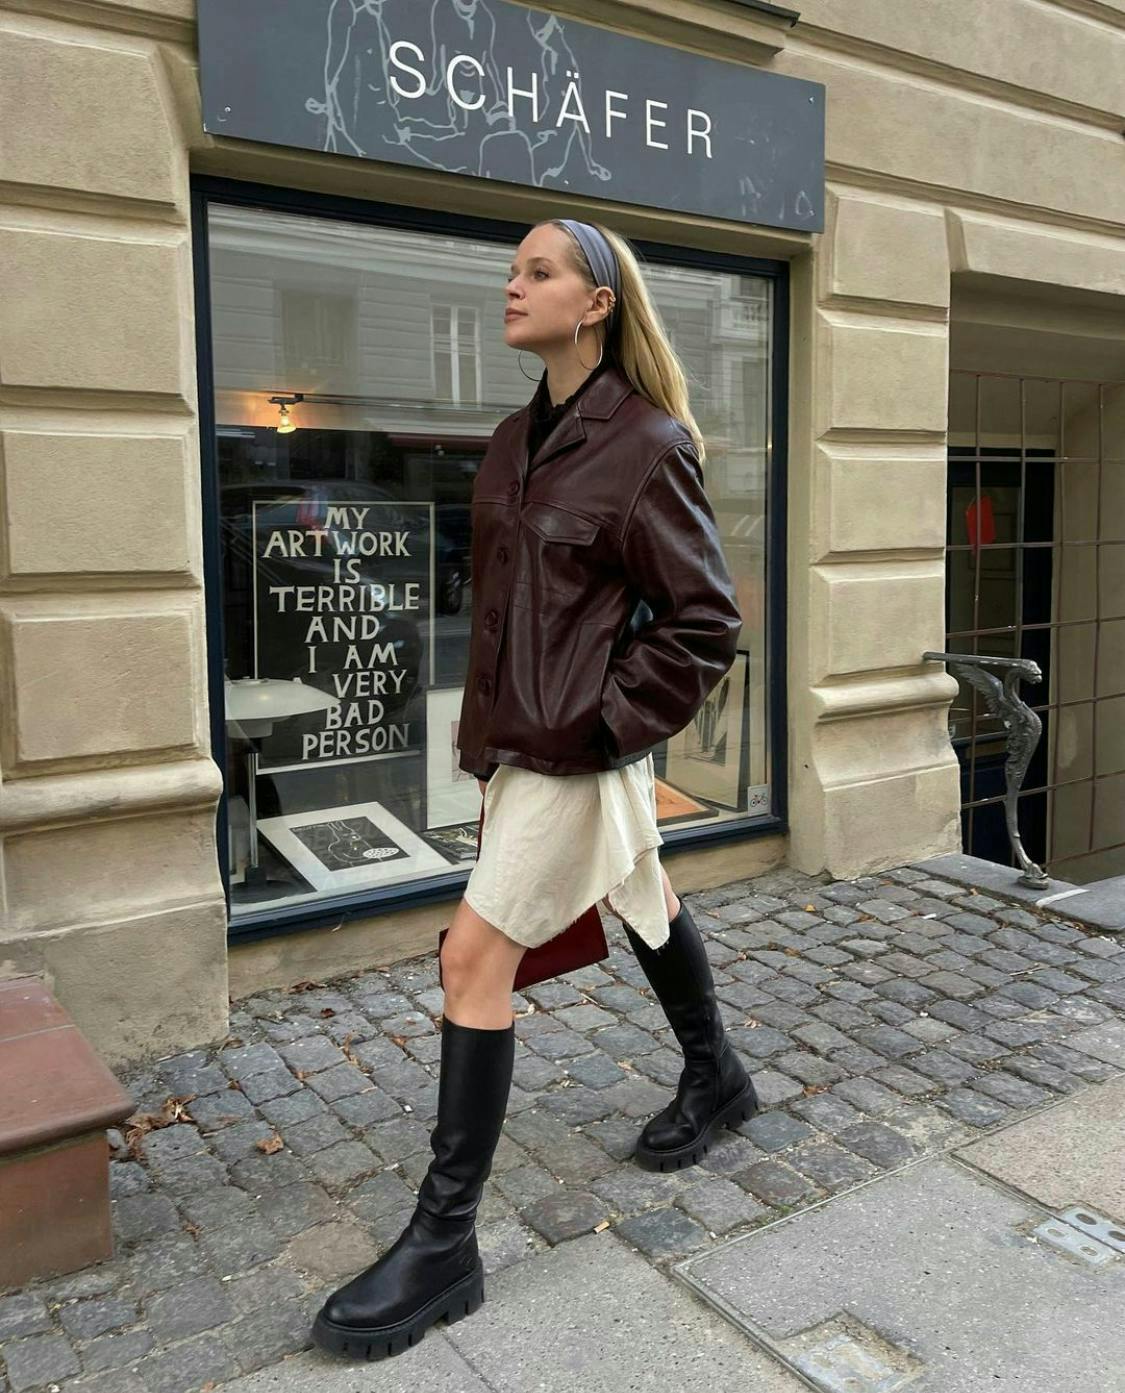 woman wearing leather jacket and skirt walking down street